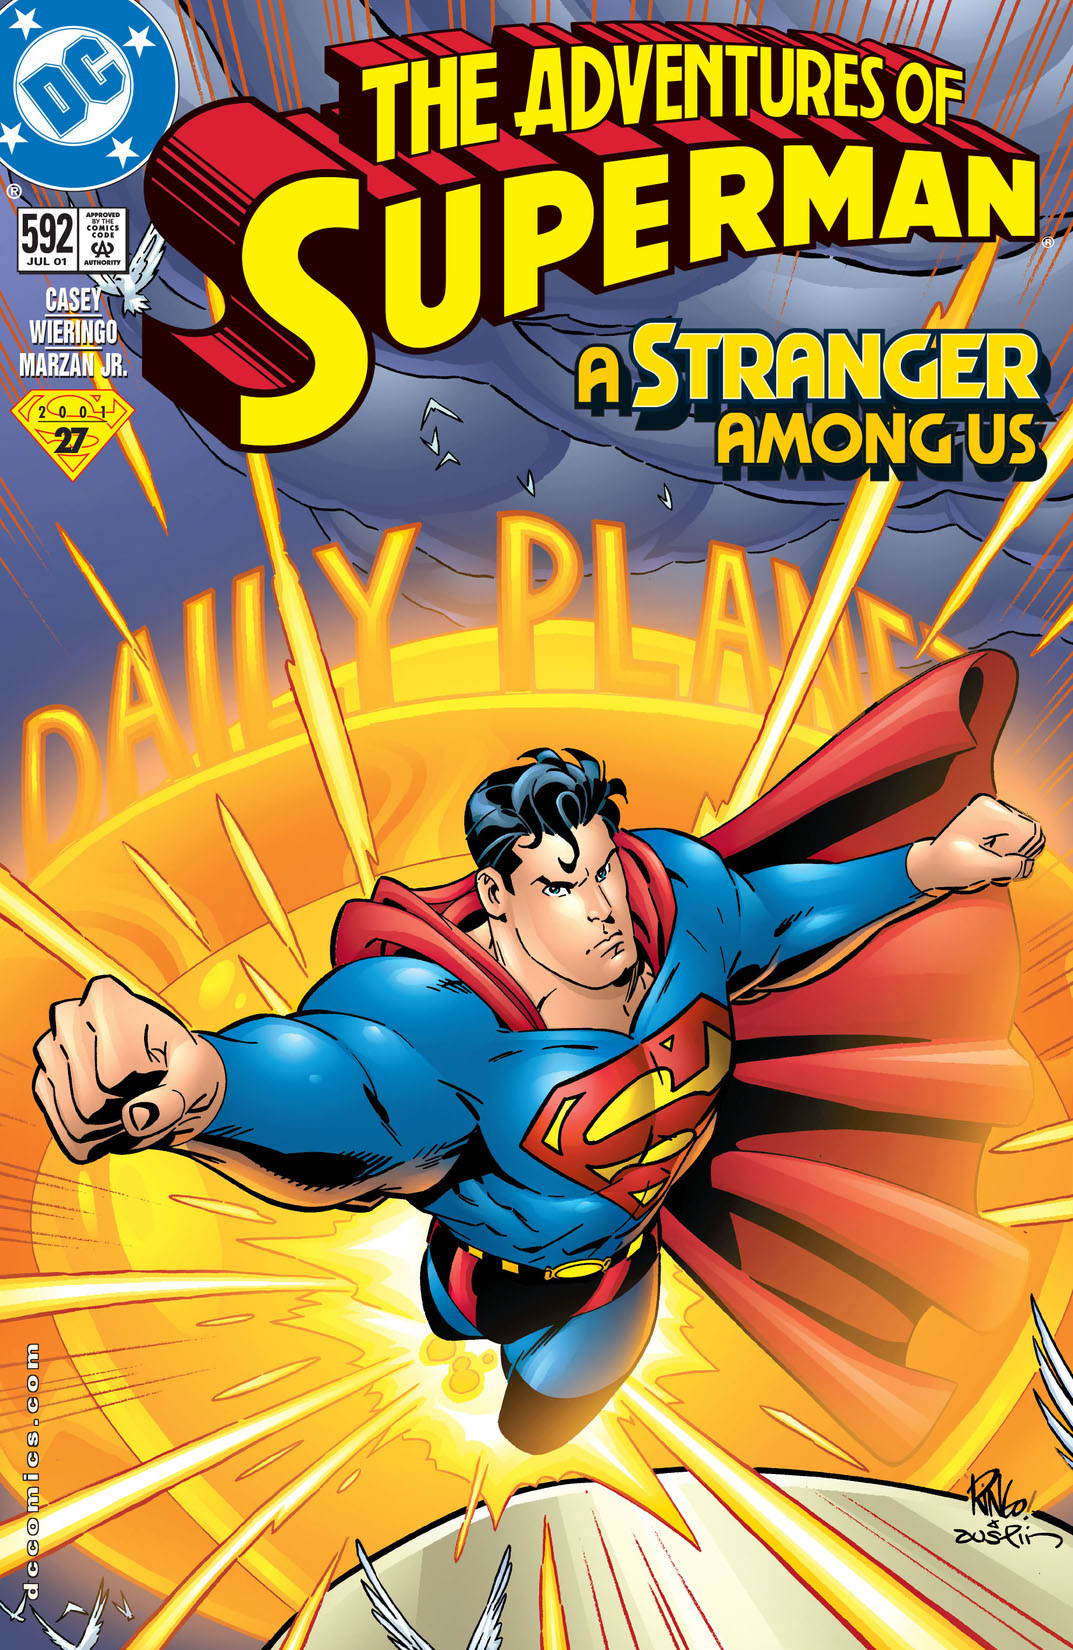 Adventures of Superman (1987-2006) #592 preview images